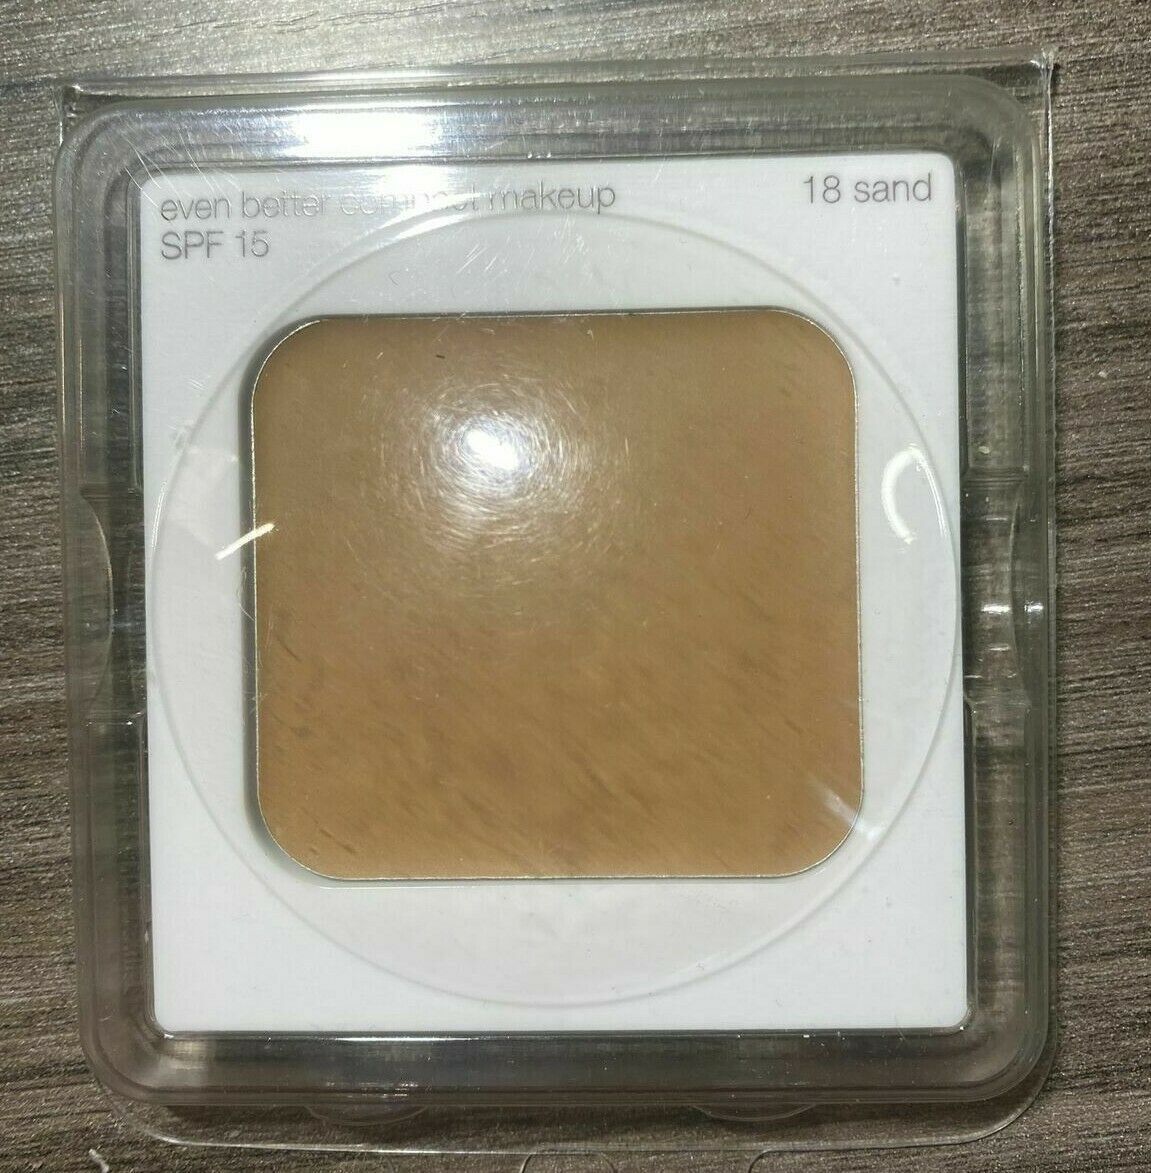 Primary image for Clinique Even Better Compact Makeup SPF 15 SAND 18 Refill NeW